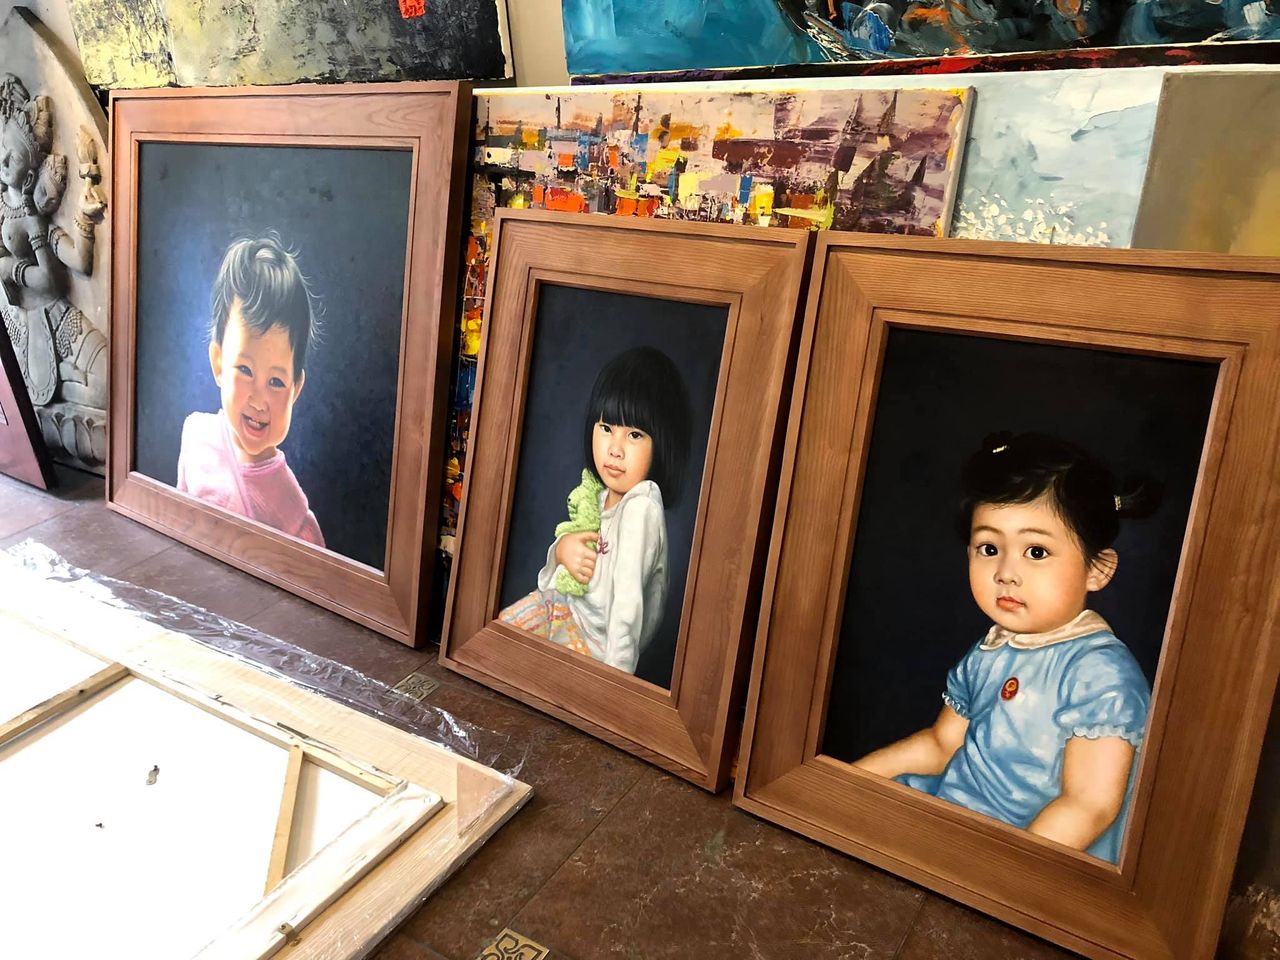 The customer portrait paintings are completed. Looking at pictures, looking at photos reminds us of a beautiful moment with time - the moment of Angels!